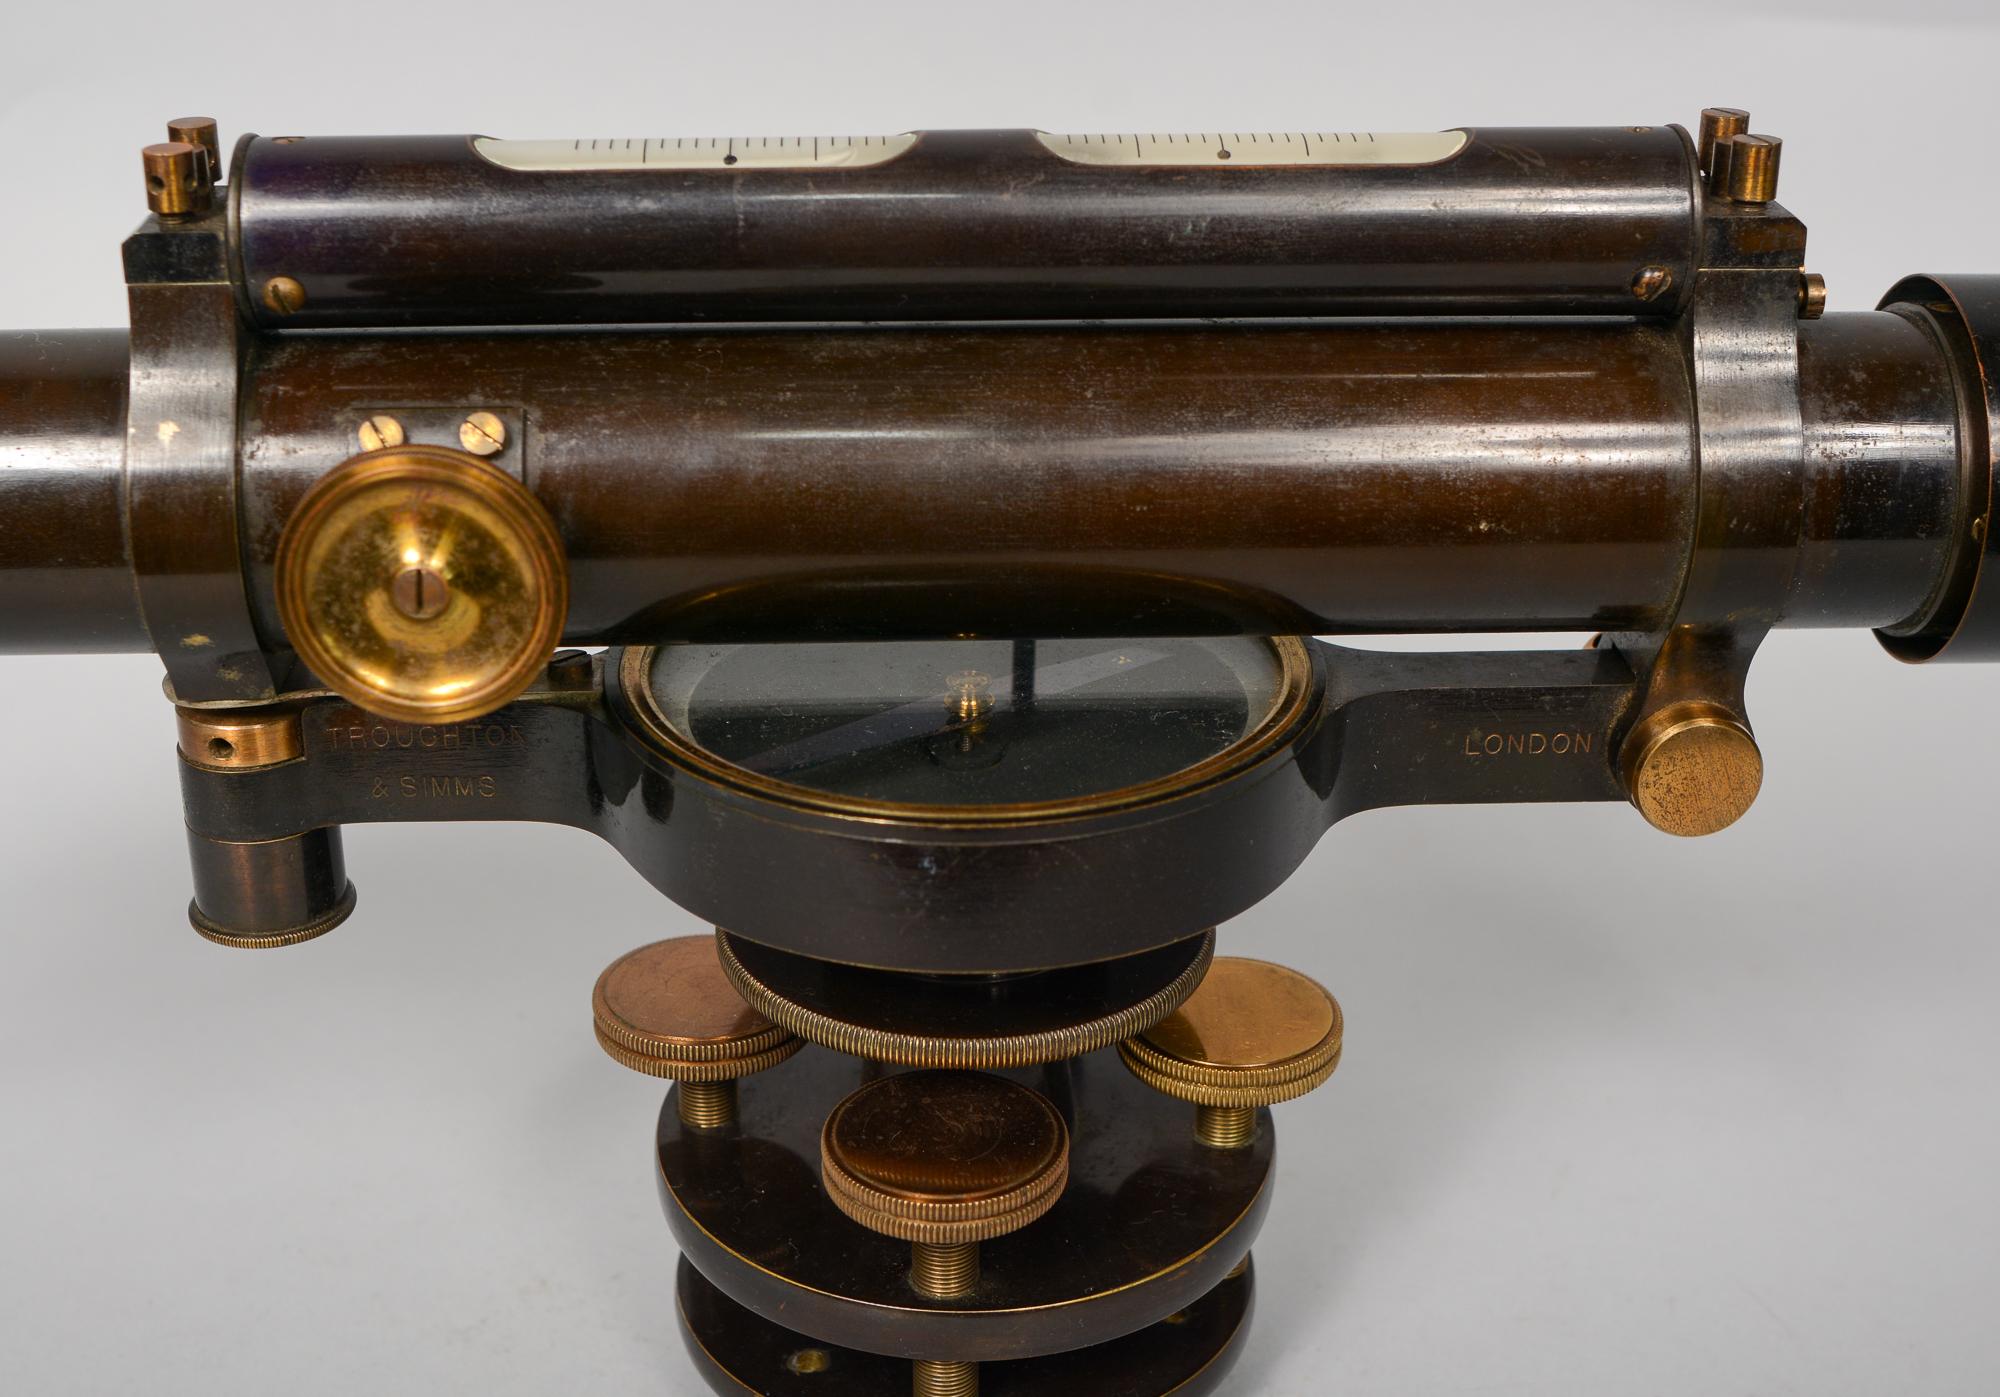 Troughton and Simms London Surveyor's Level in Mahogany Case 1